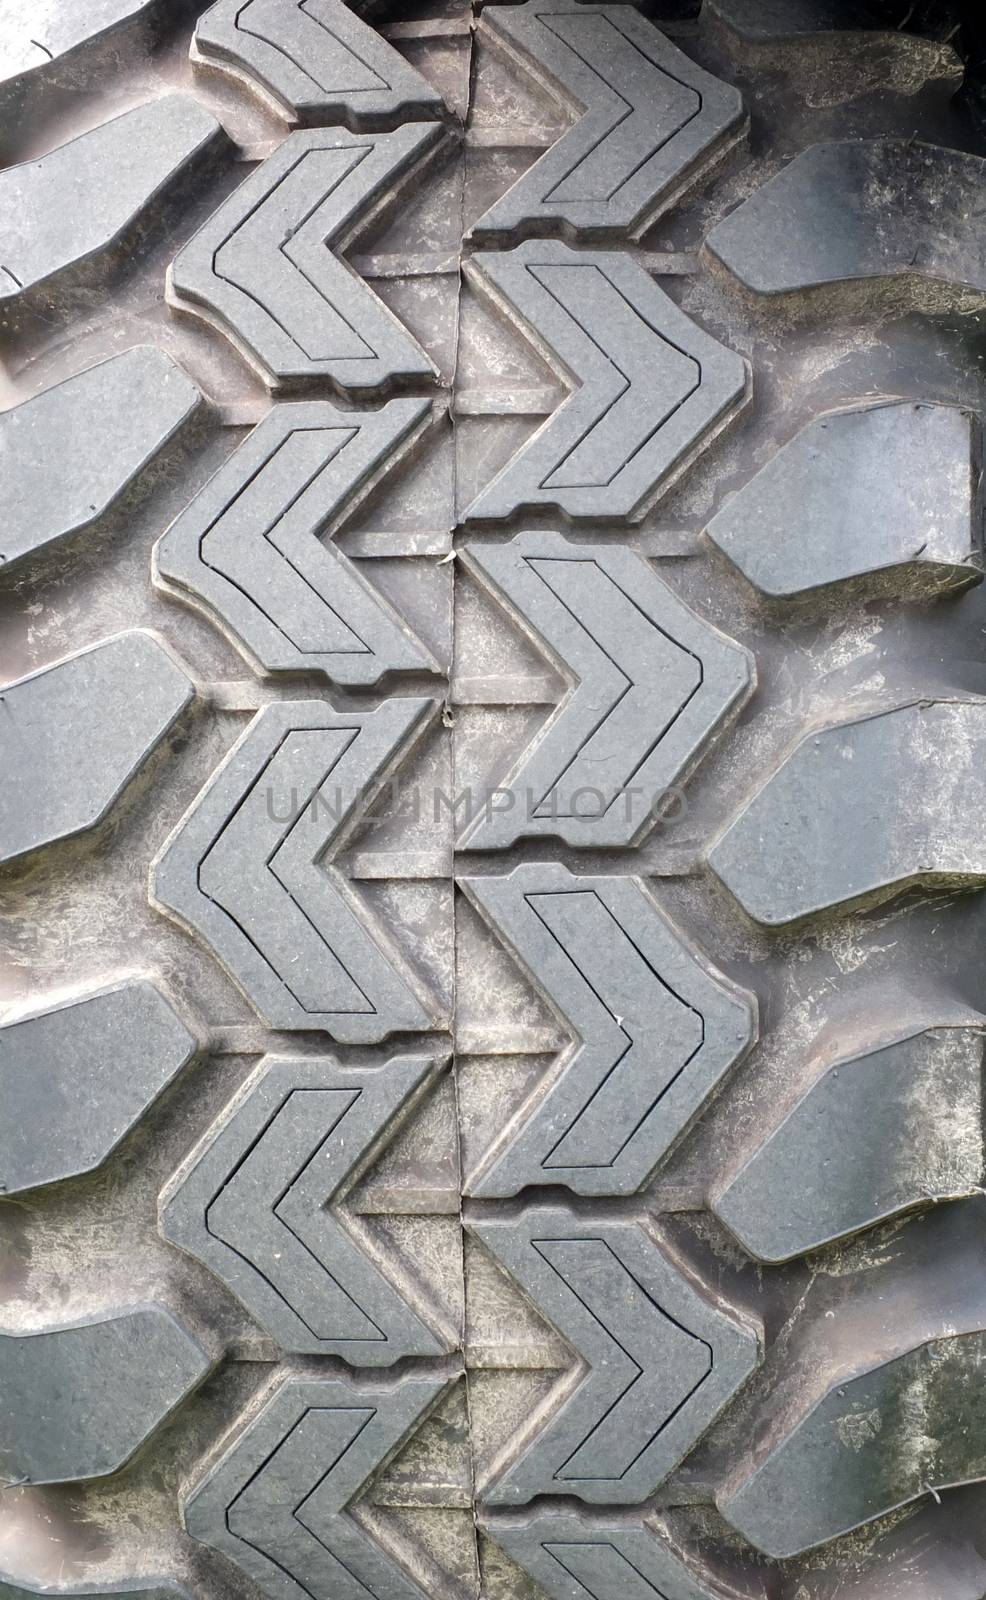 a close up of the tread of a heavy duty all terrain vehicle tyre